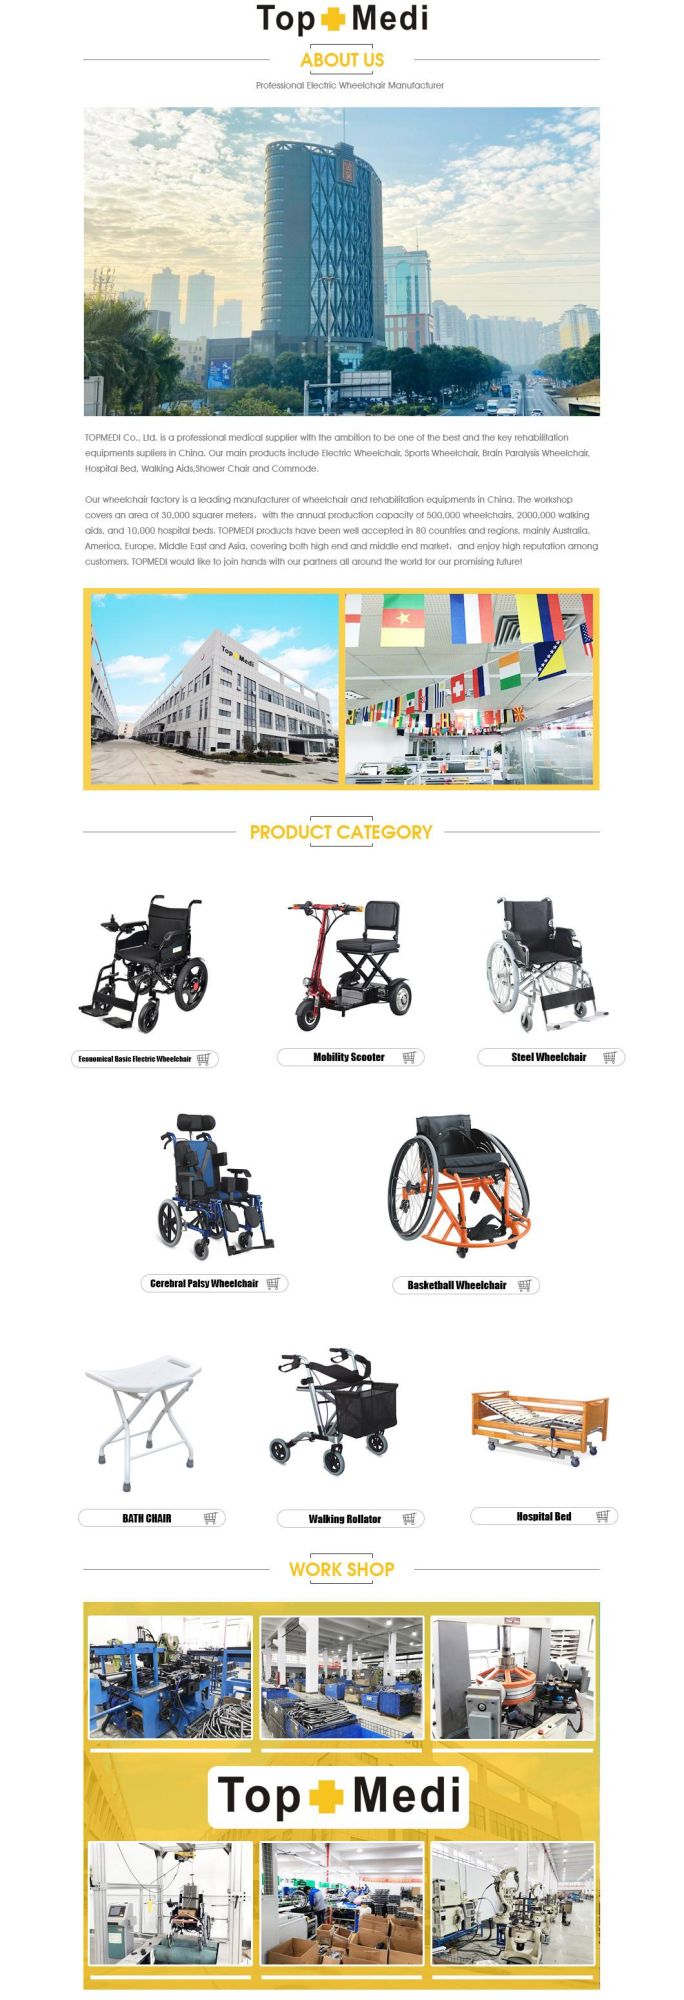 Aluminum Alloy Frame Foldable Safety Manual Wheelchair with Lifting Legrest Function for Patient